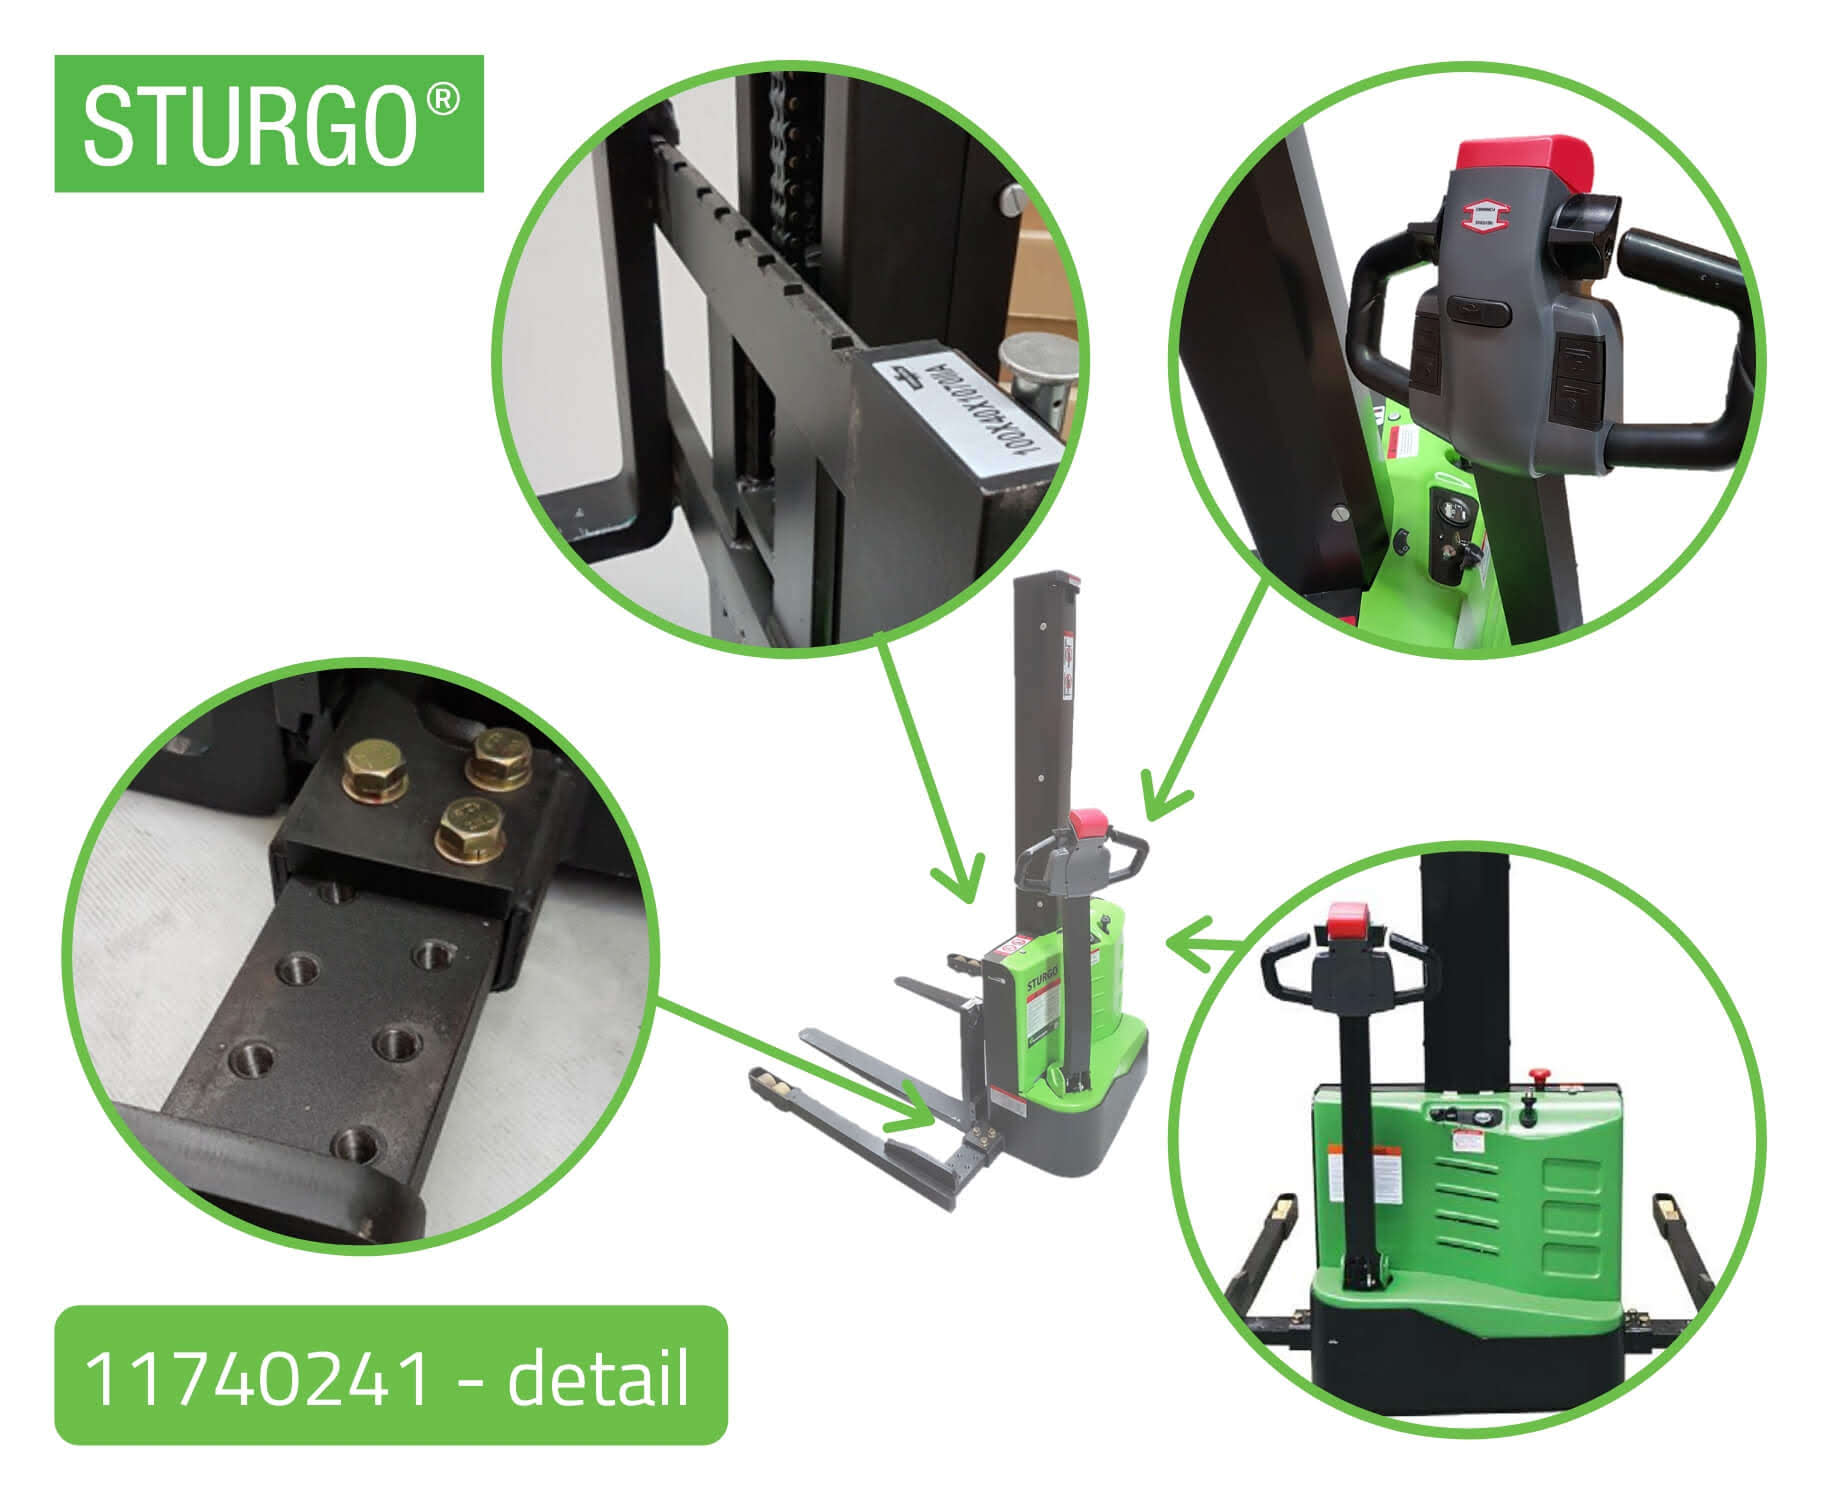 STURGO® Compact Electric Straddle Stacker